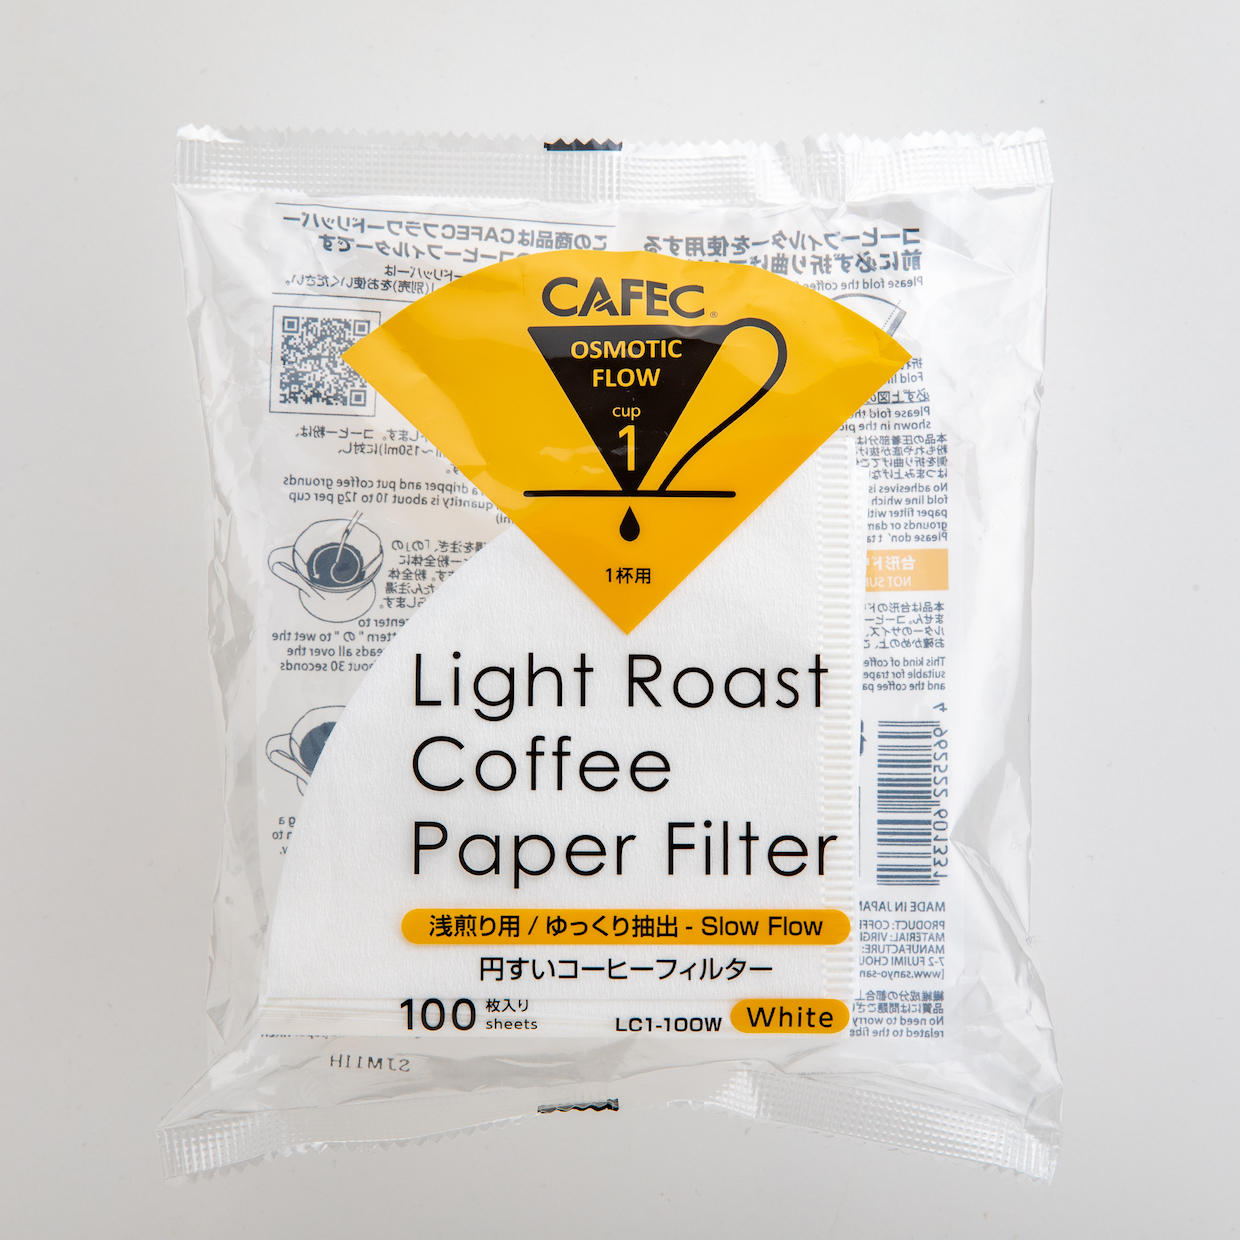 Cafec paper coffee filters